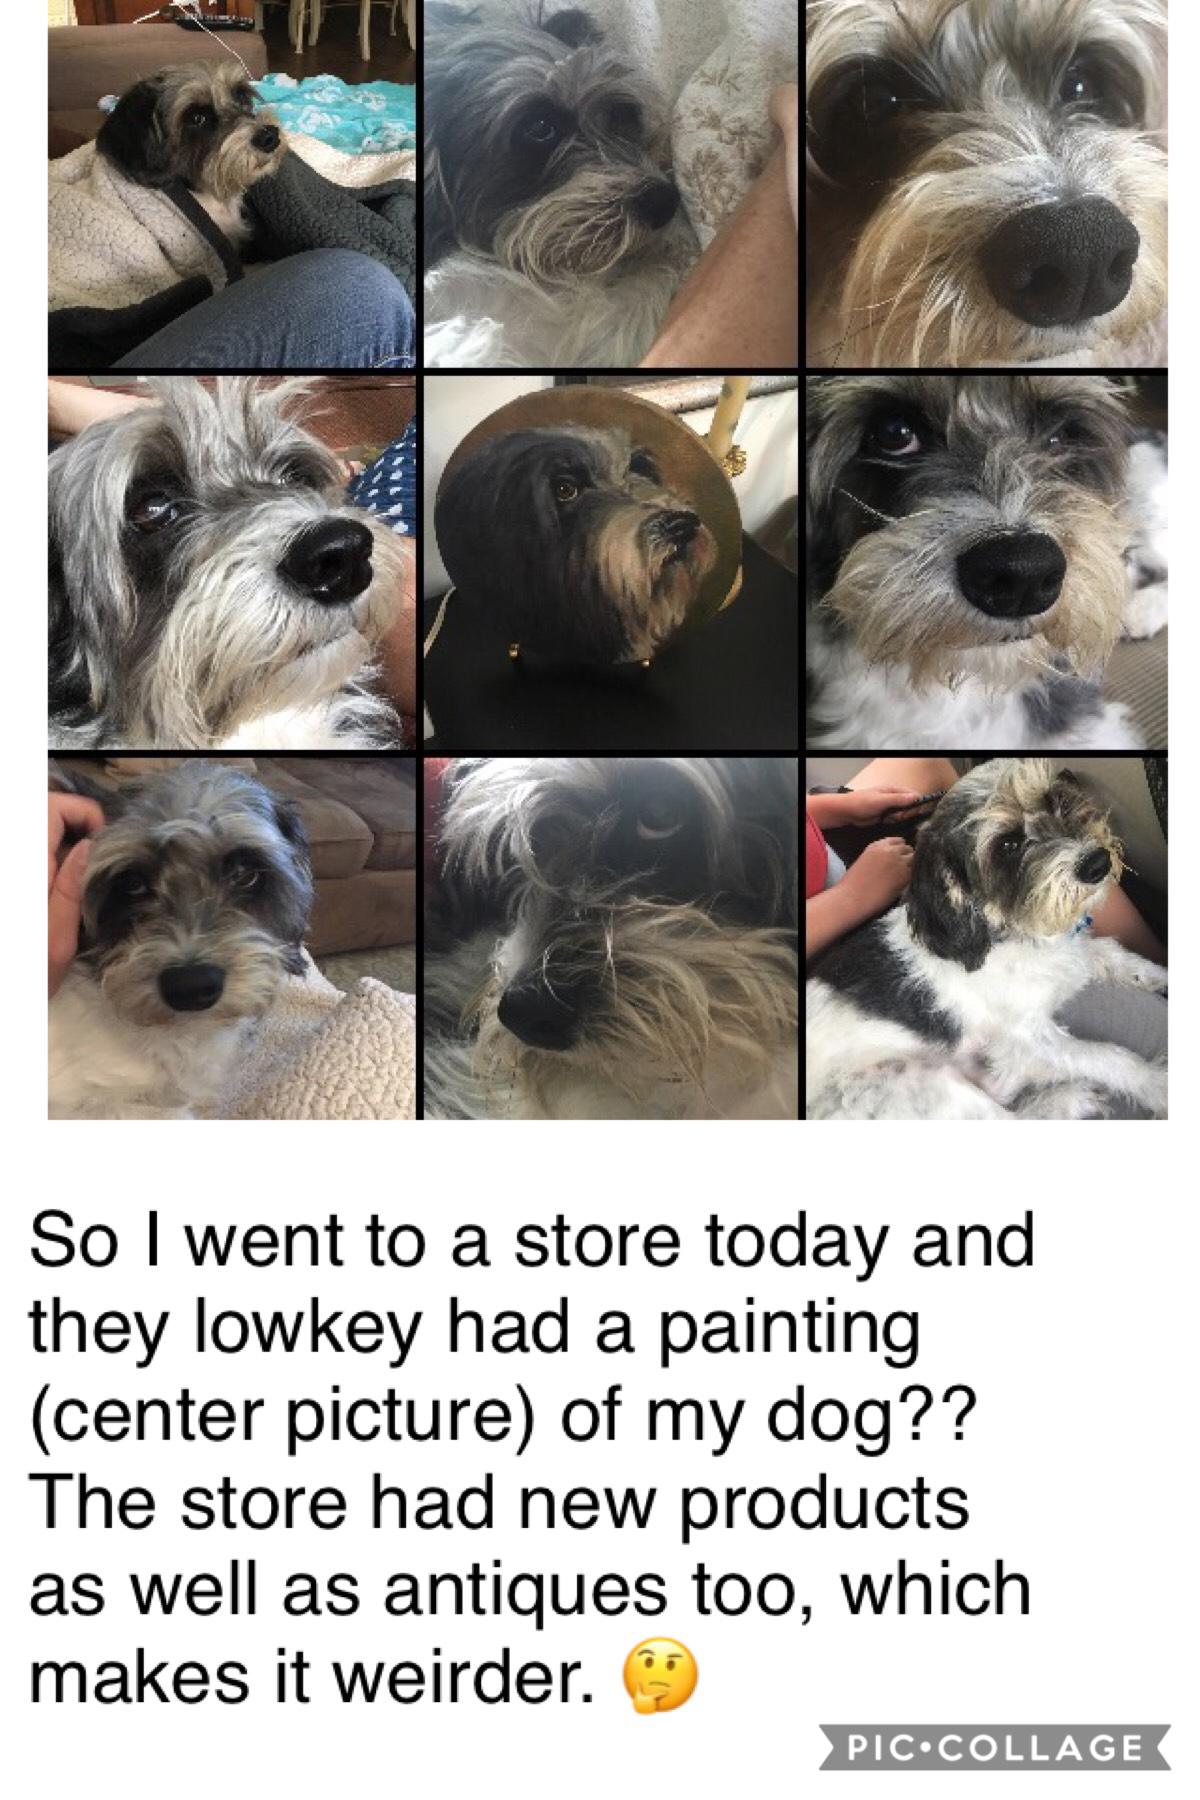 I think the top left and middle left pictures of my dog really match it